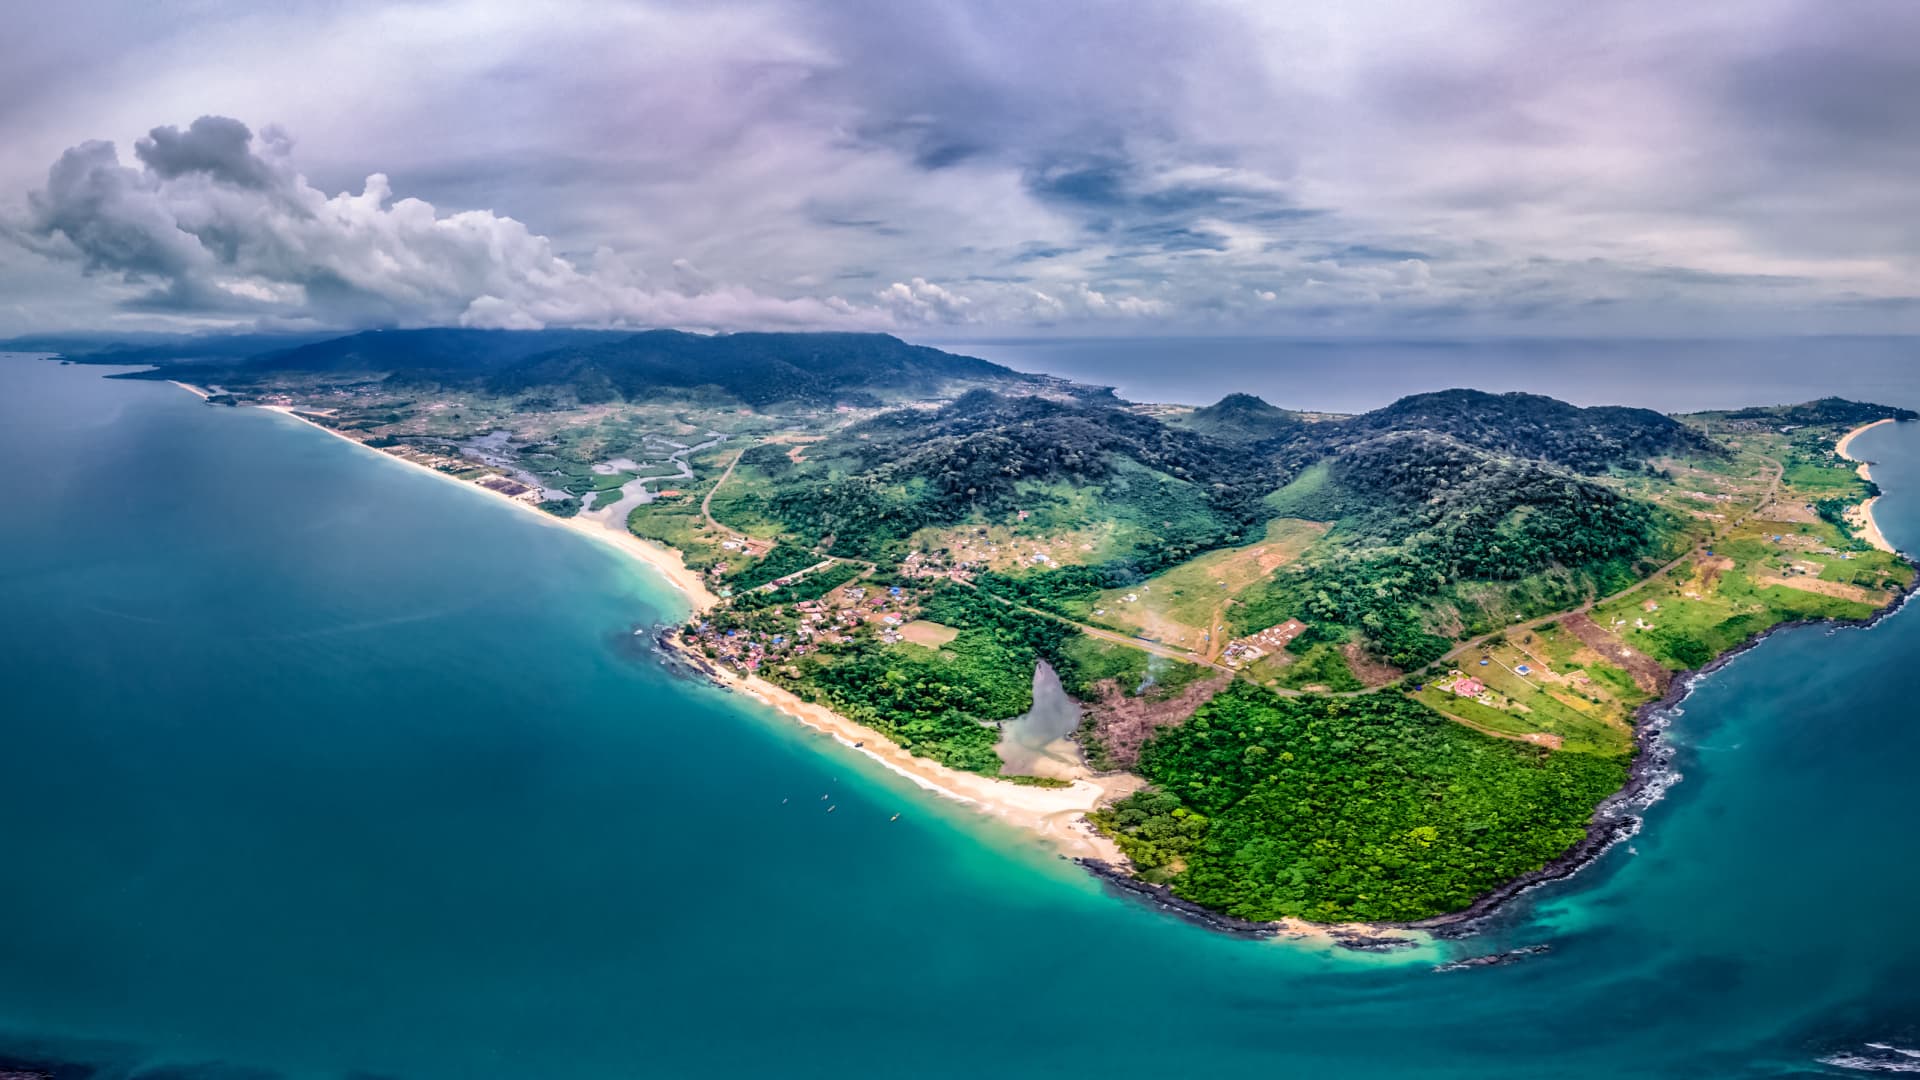 National Geographic named Sierra Leone as one of the most exciting destinations in 2024.